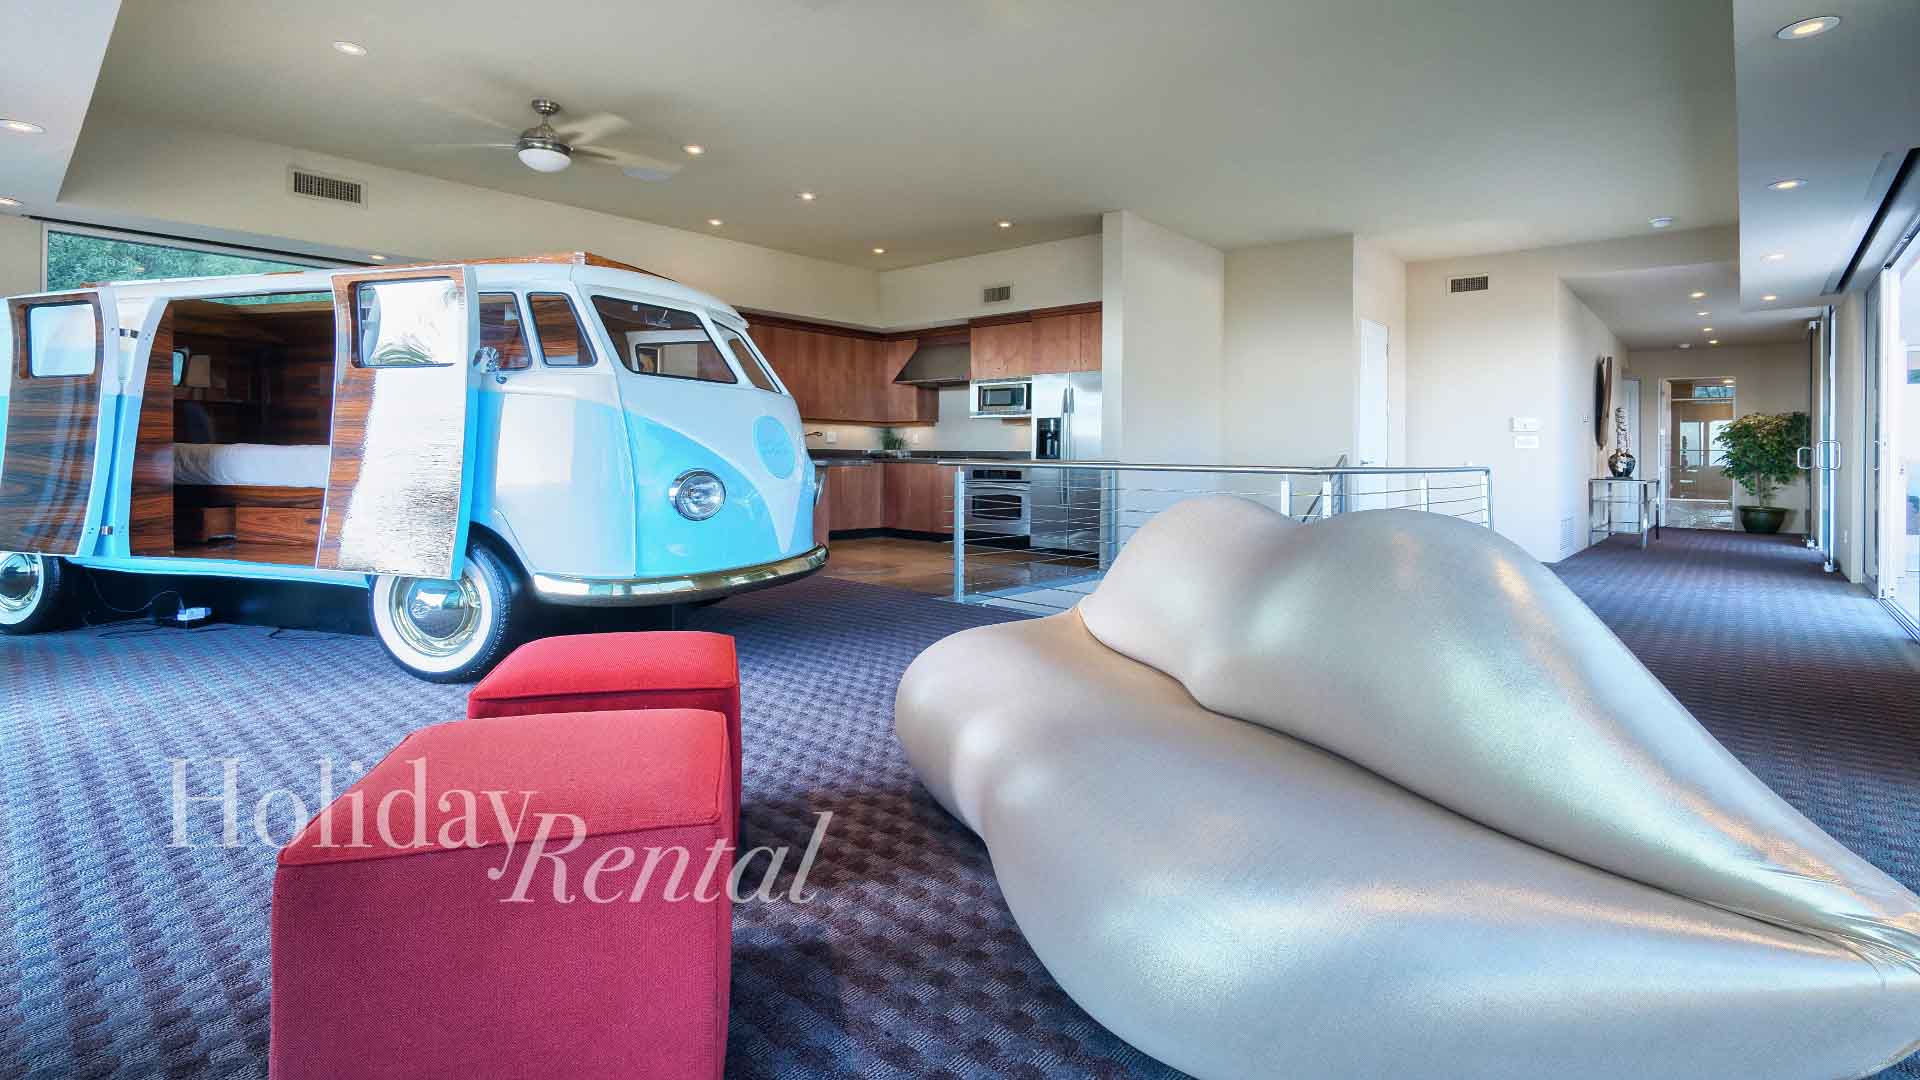 You'll have the chance to sleep in a custom-made Volkswagen bed